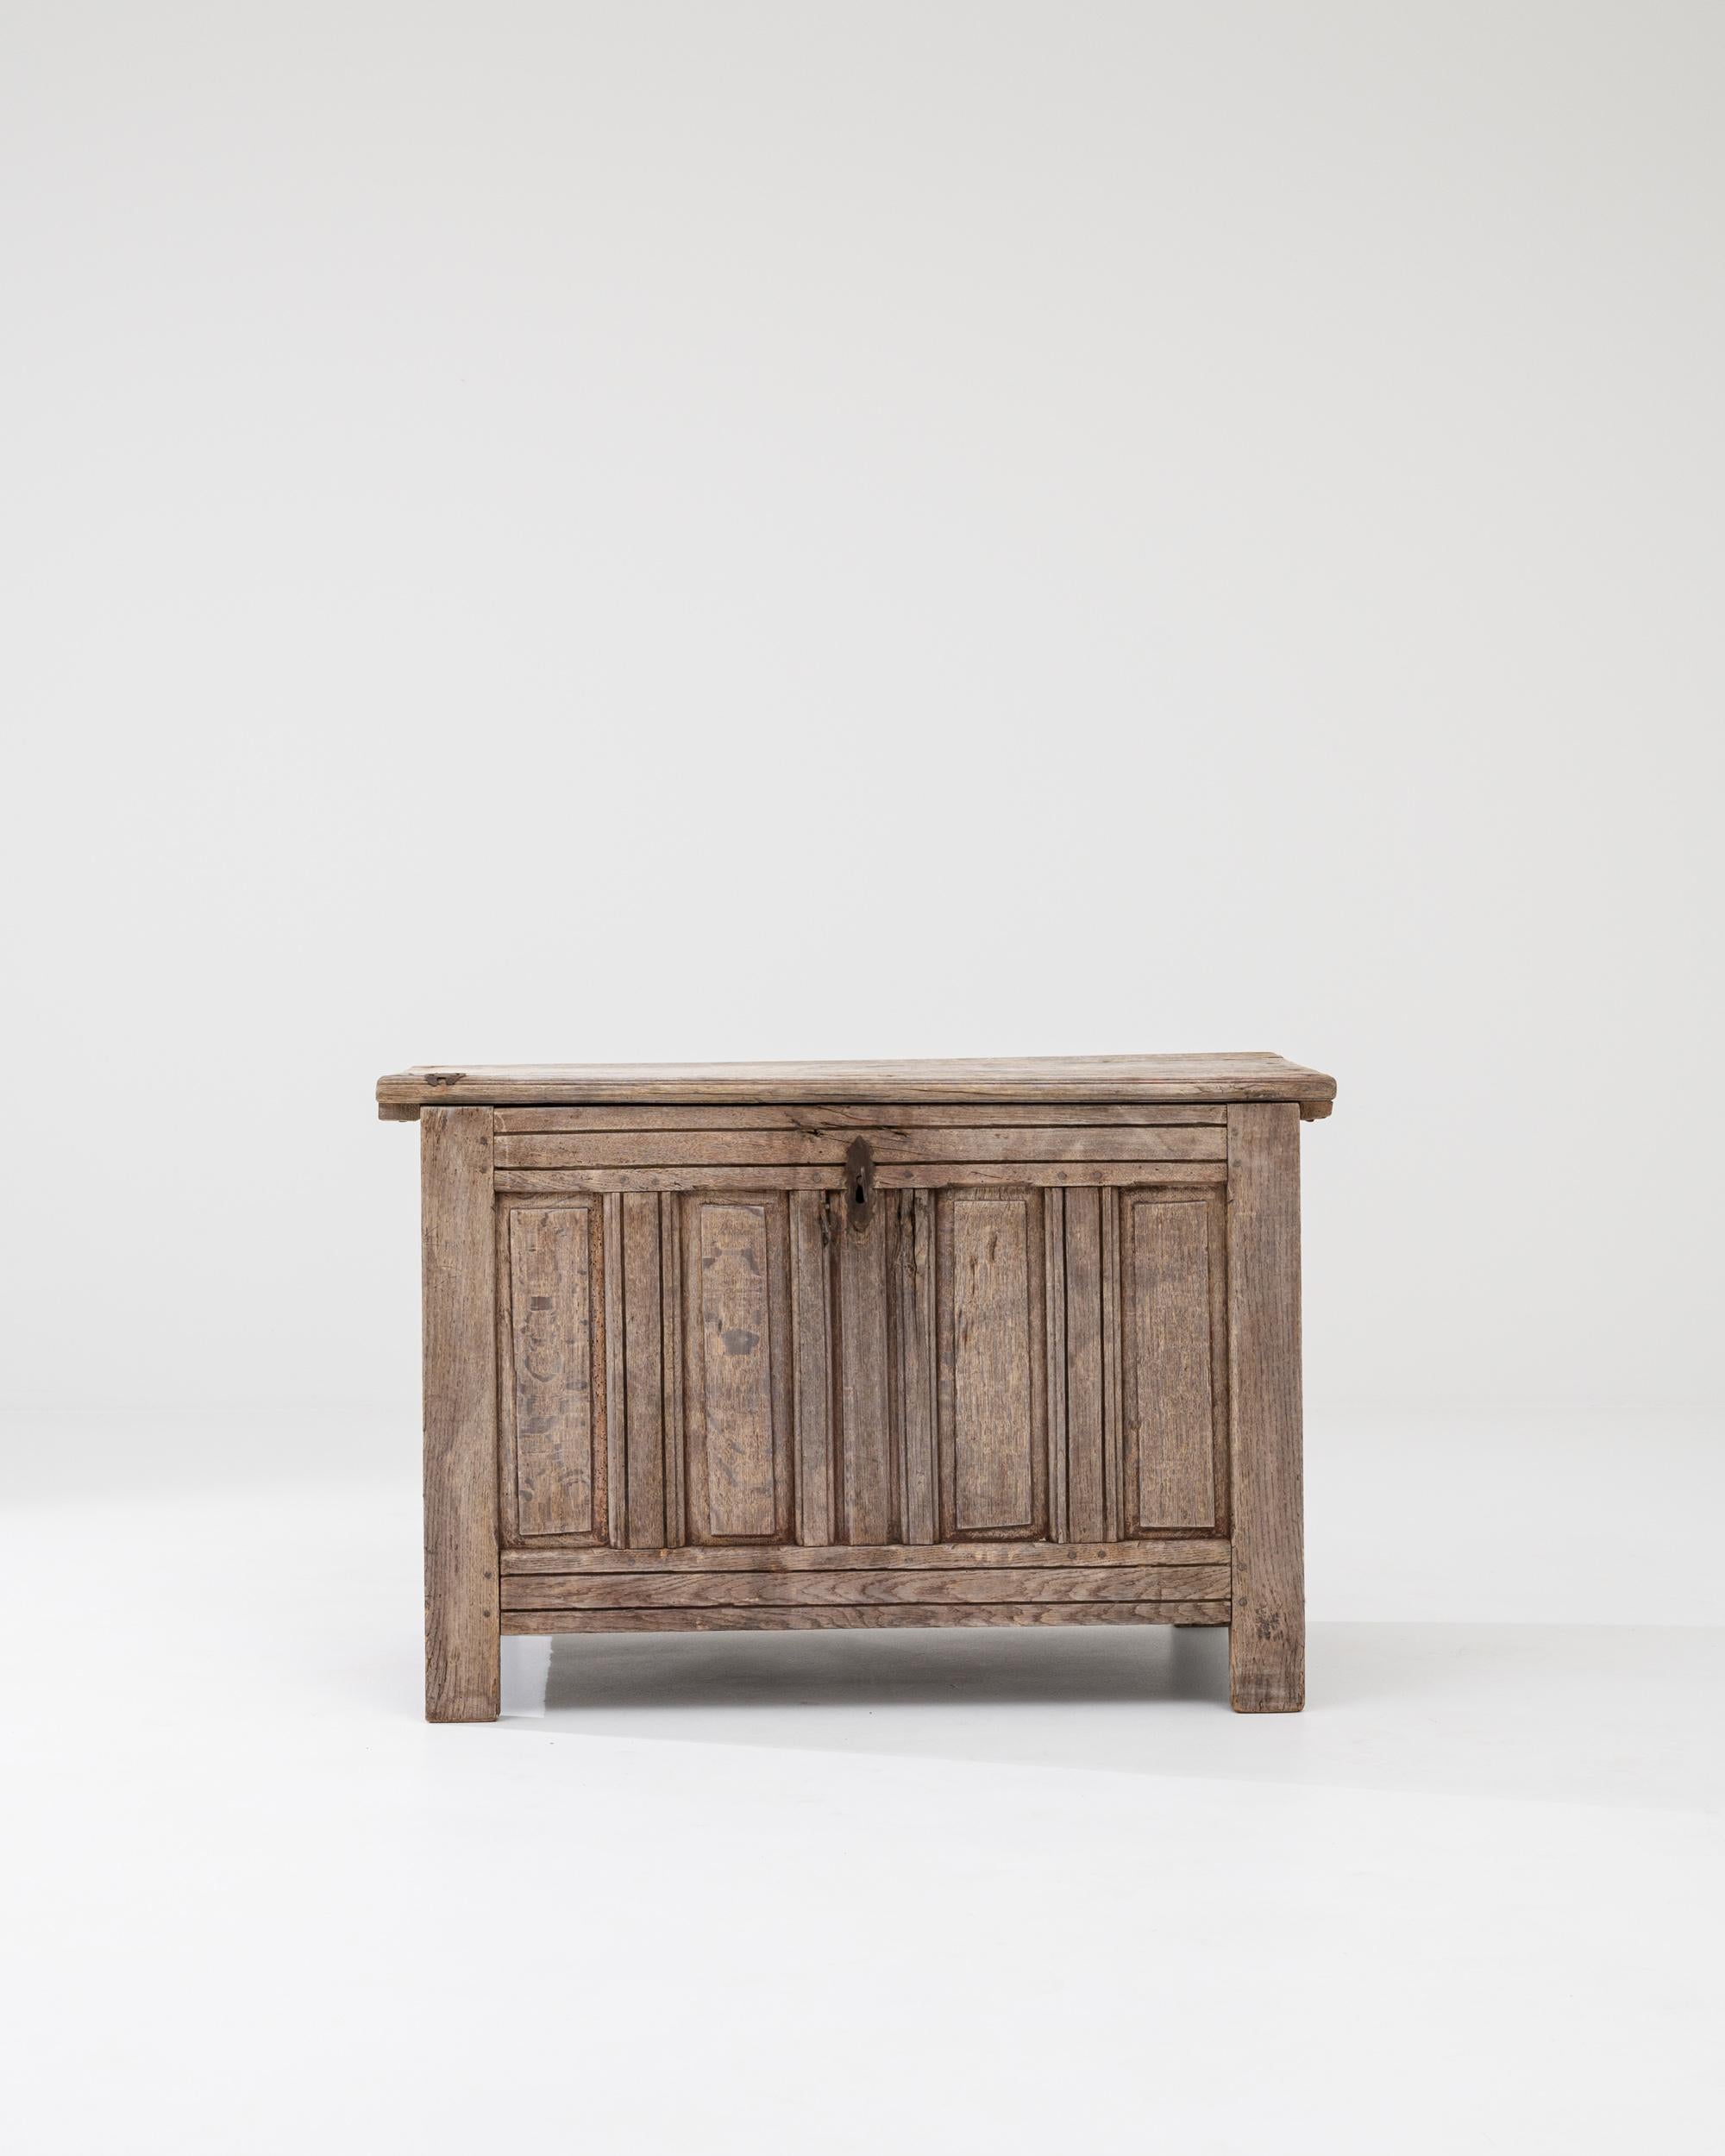 Simple and statuesque, this antique wooden chest possesses a romantic charm. Made in France in the 1800s, the form is inspired by the gothic chests of the middle ages: a simple silhouette that evokes a bygone age of castles and chivalry. The lid